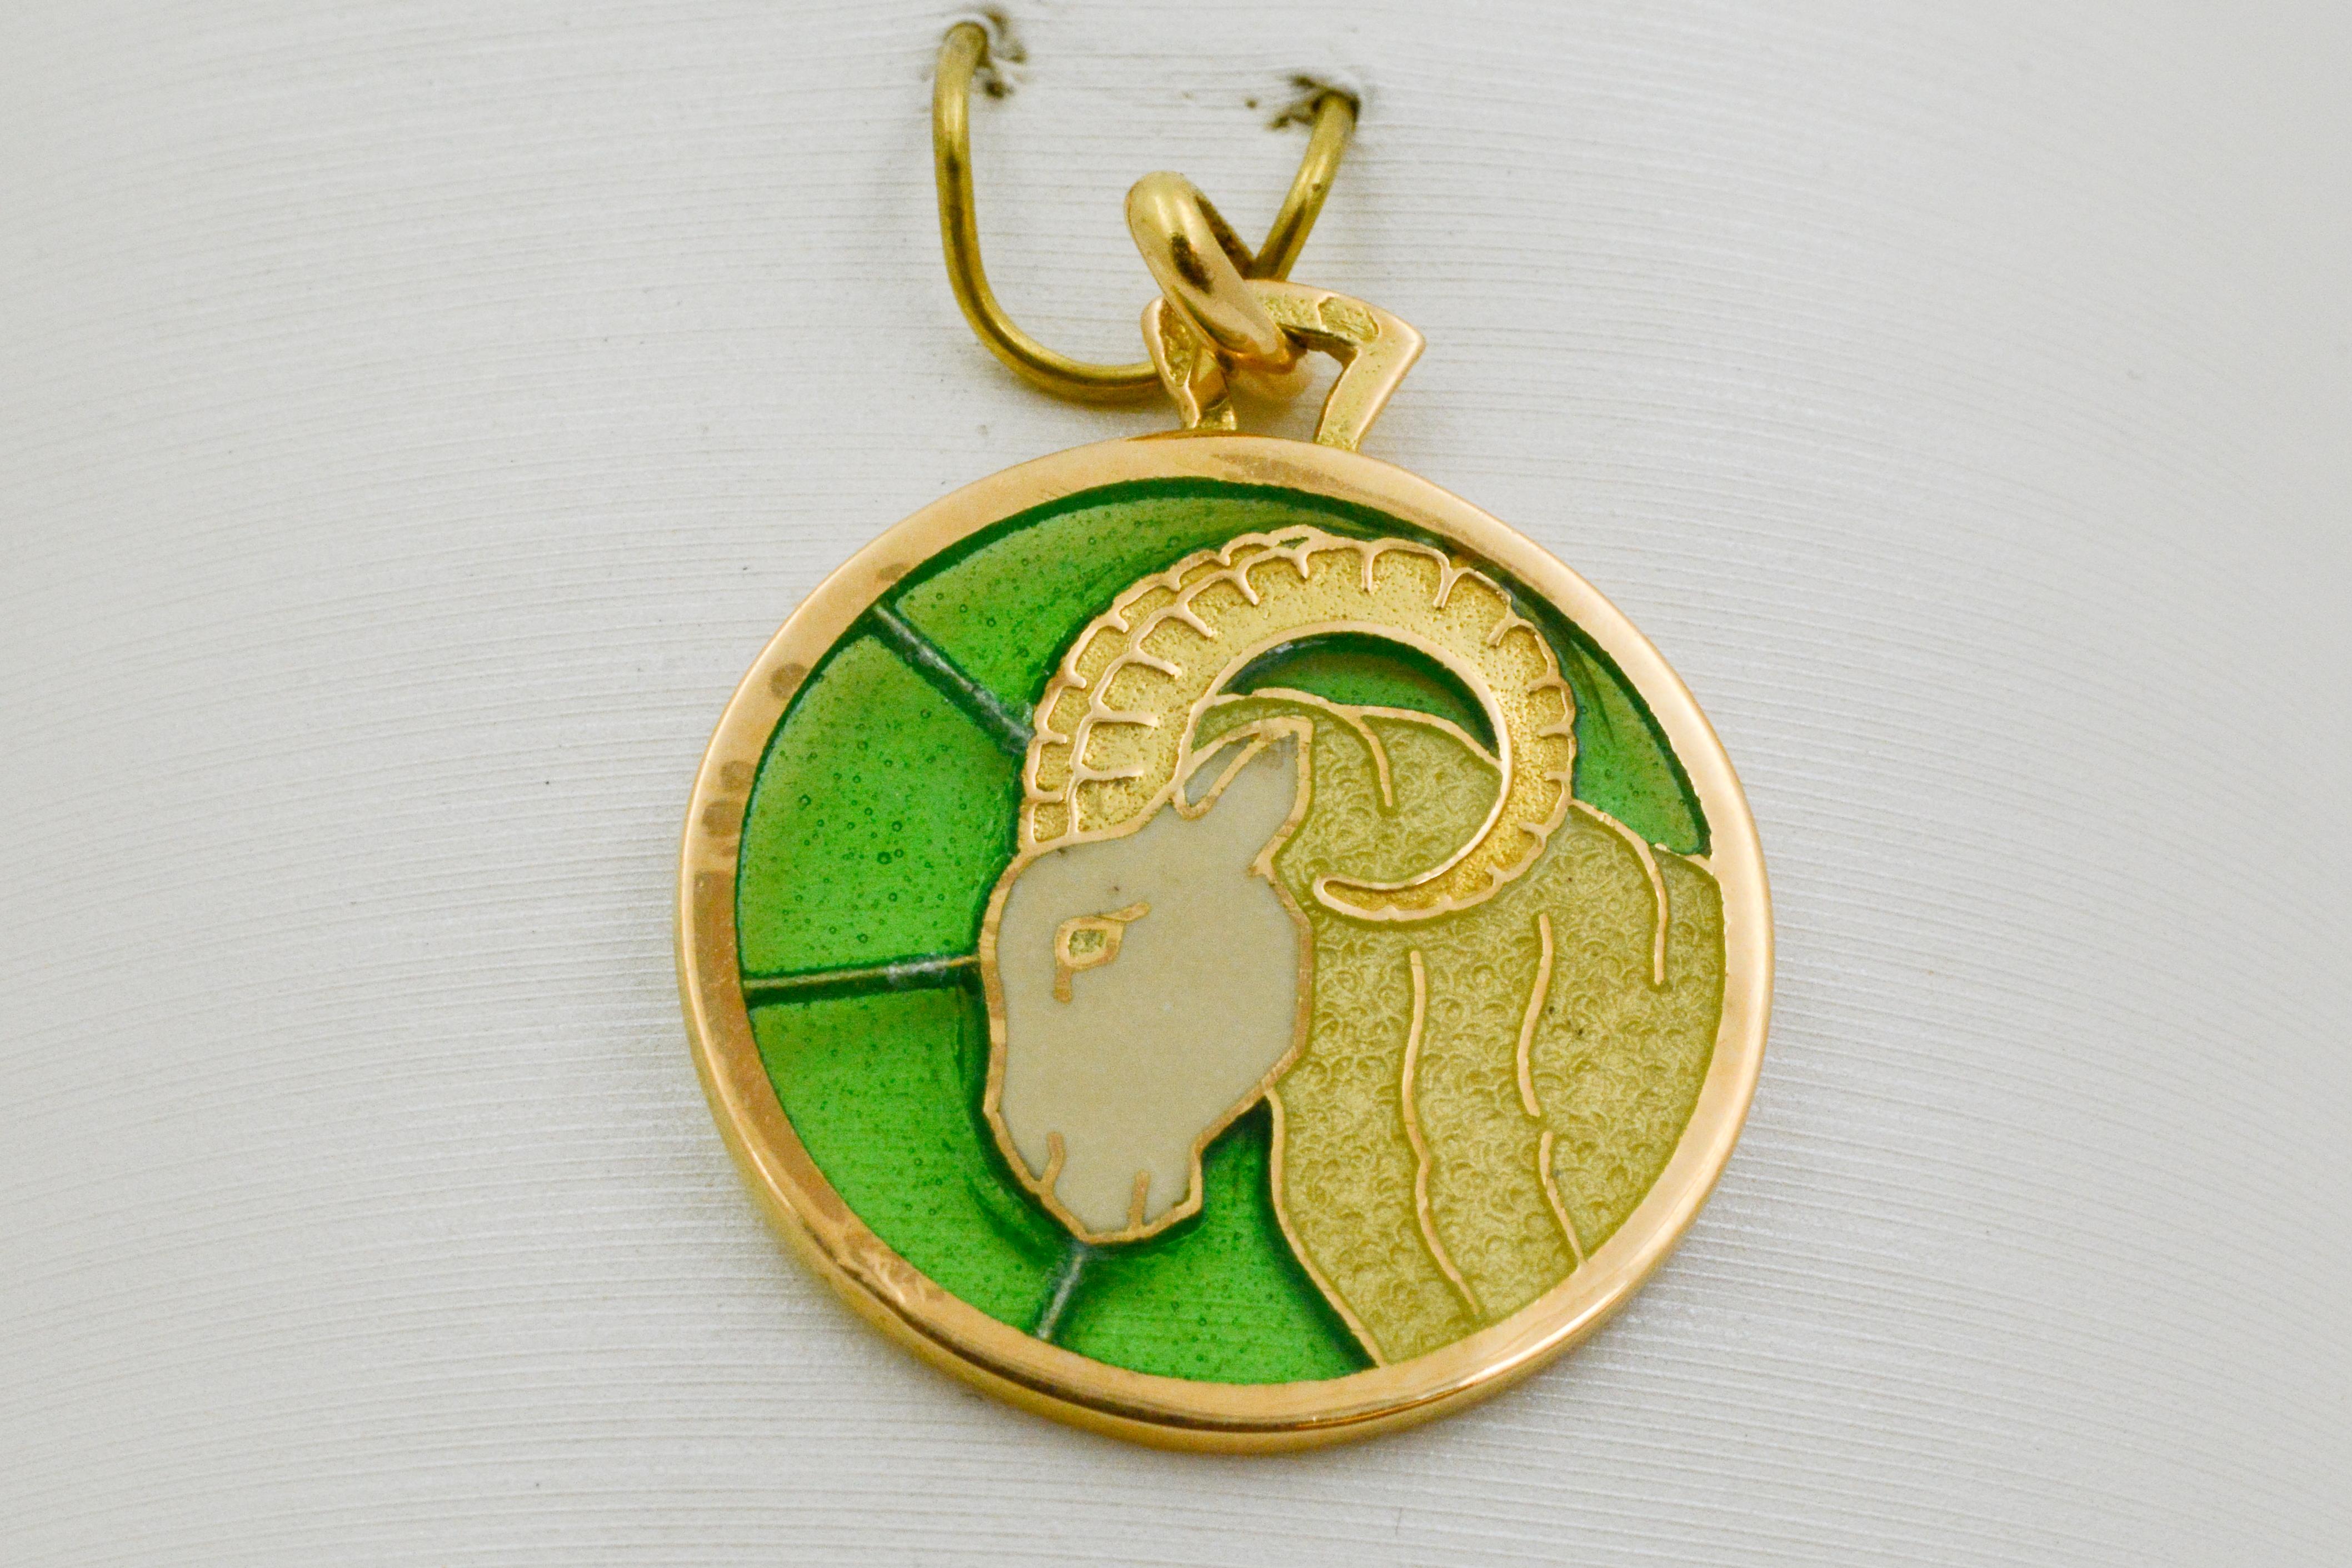 Plique a jour hand enameled glass Aries pendant. Light as a feather with intricate detailing in 18 karat yellow gold and handmade enameled glass showcasing a magnificent ram on a brilliant green background.